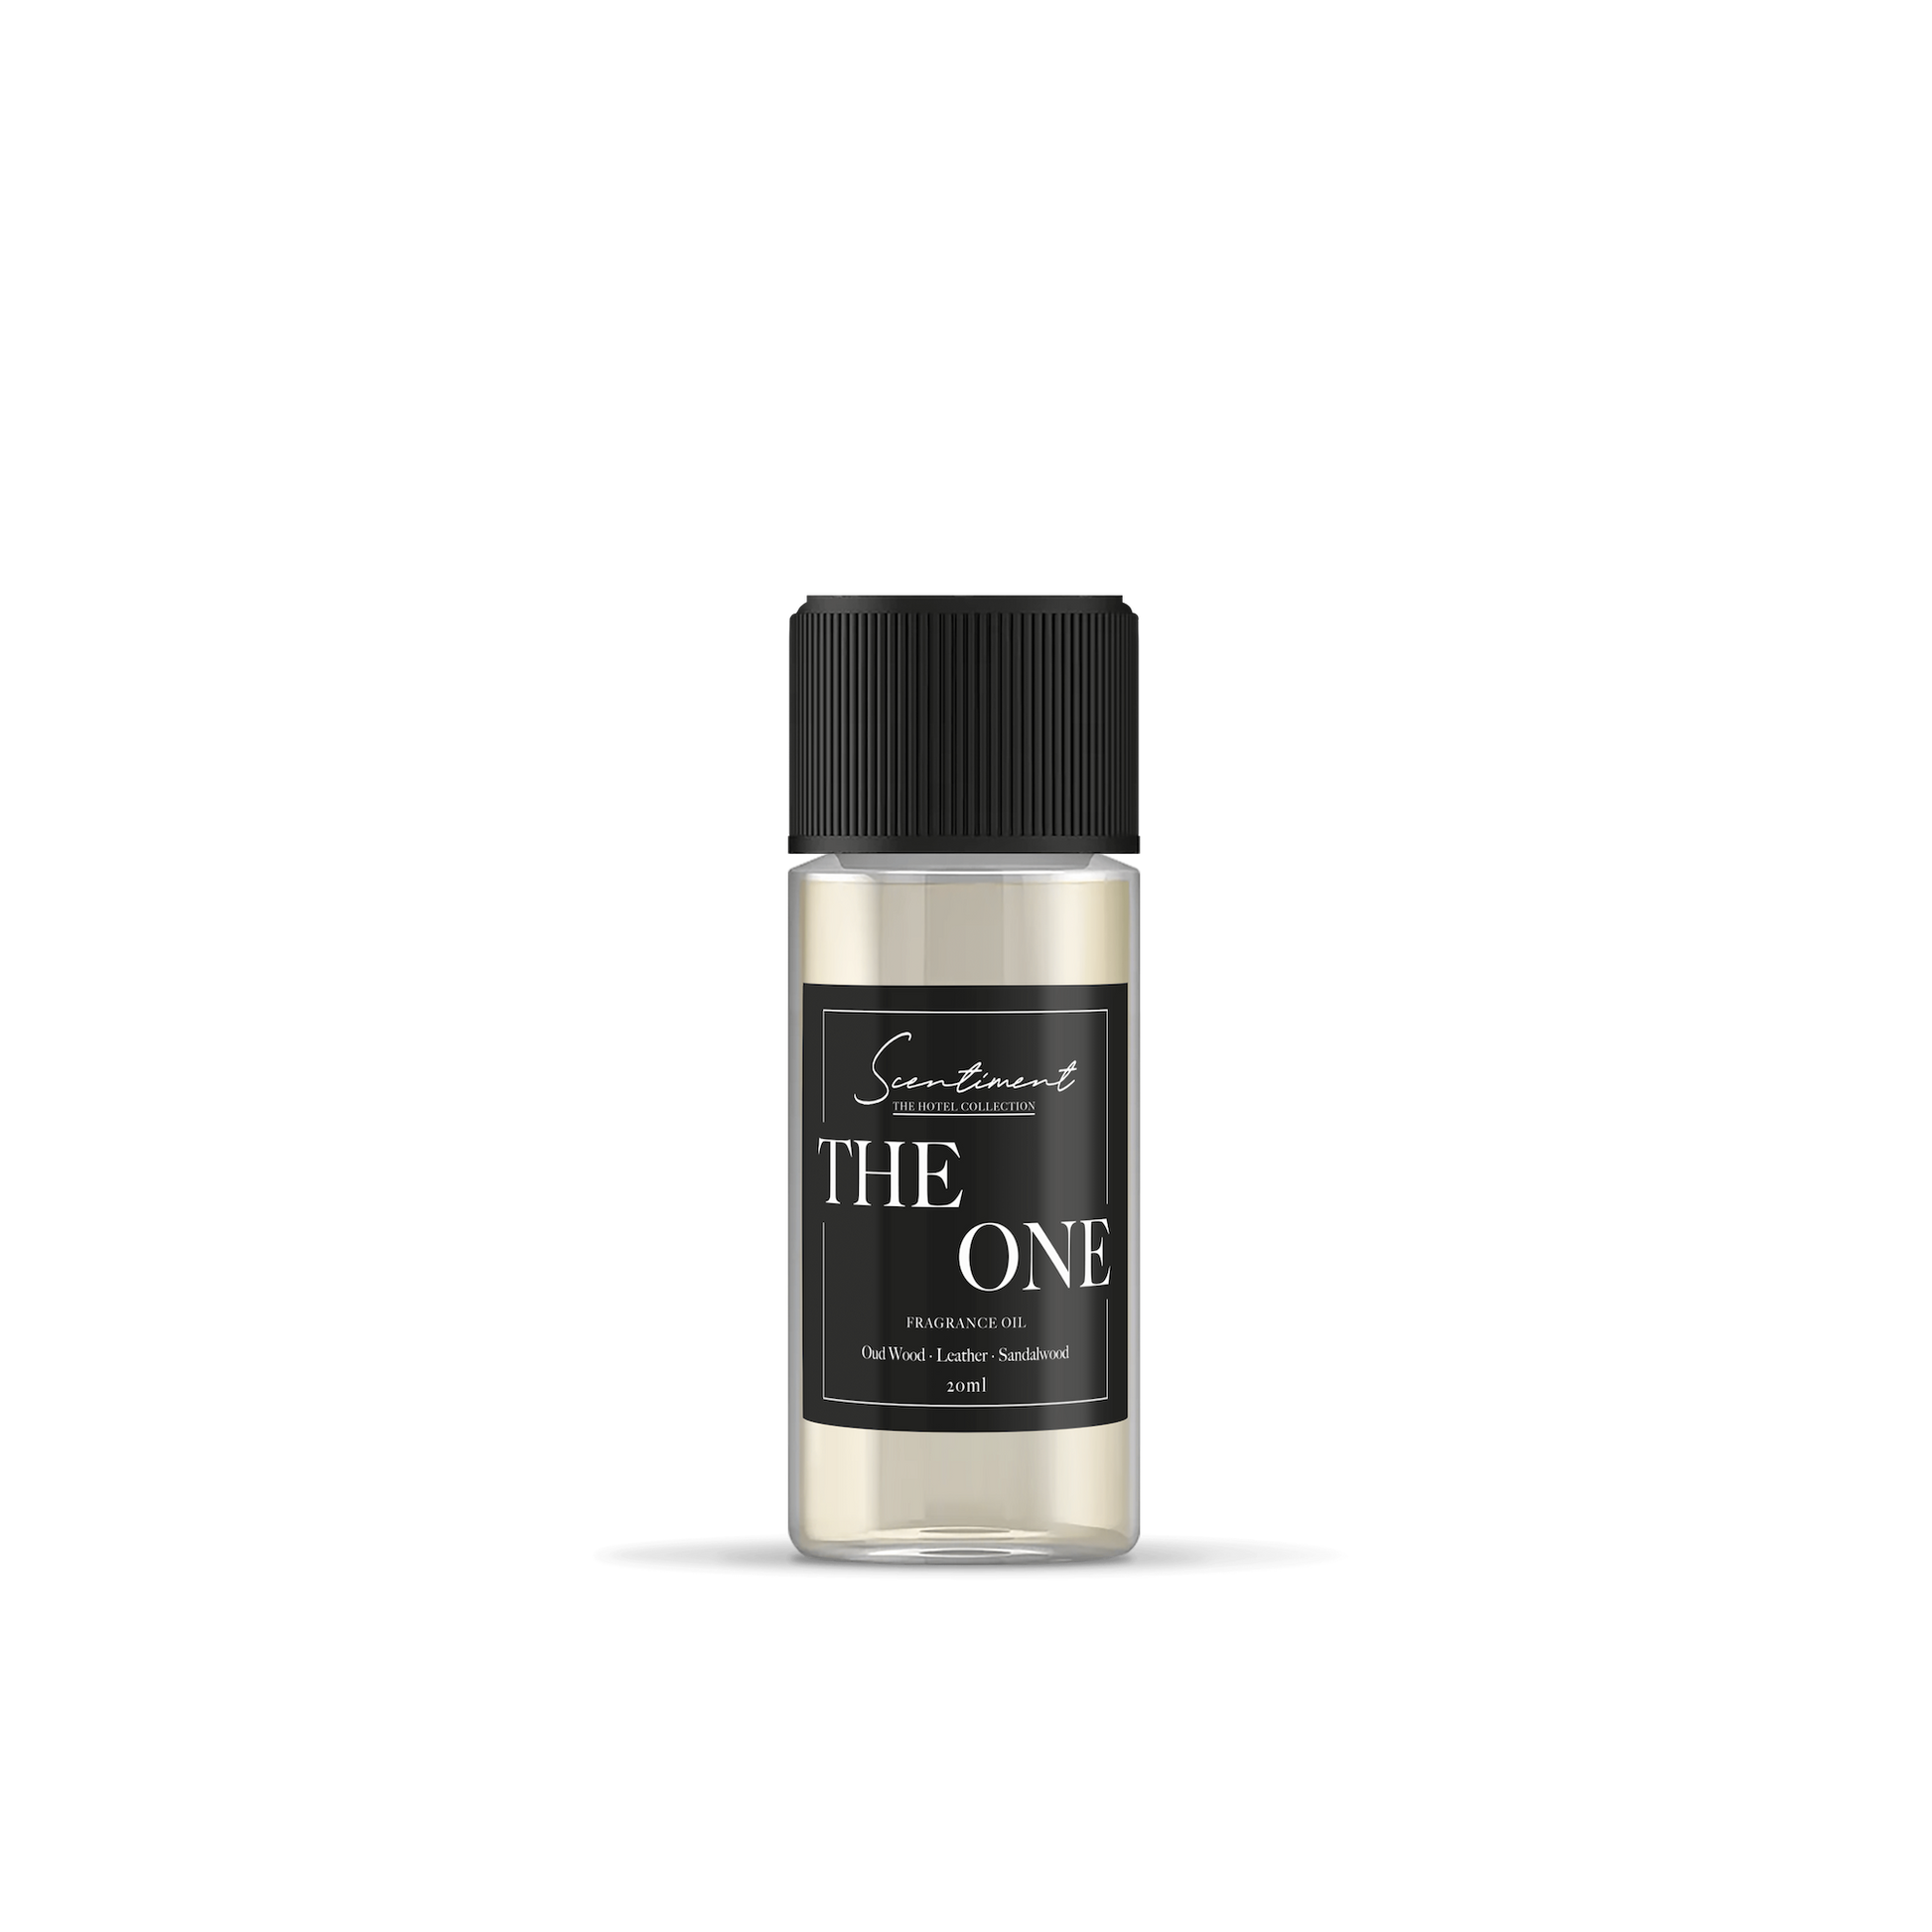 The One Fragrance Oil inspired by The One® Hotel, with notes of Oud Wood, Leather, and Sandalwood.